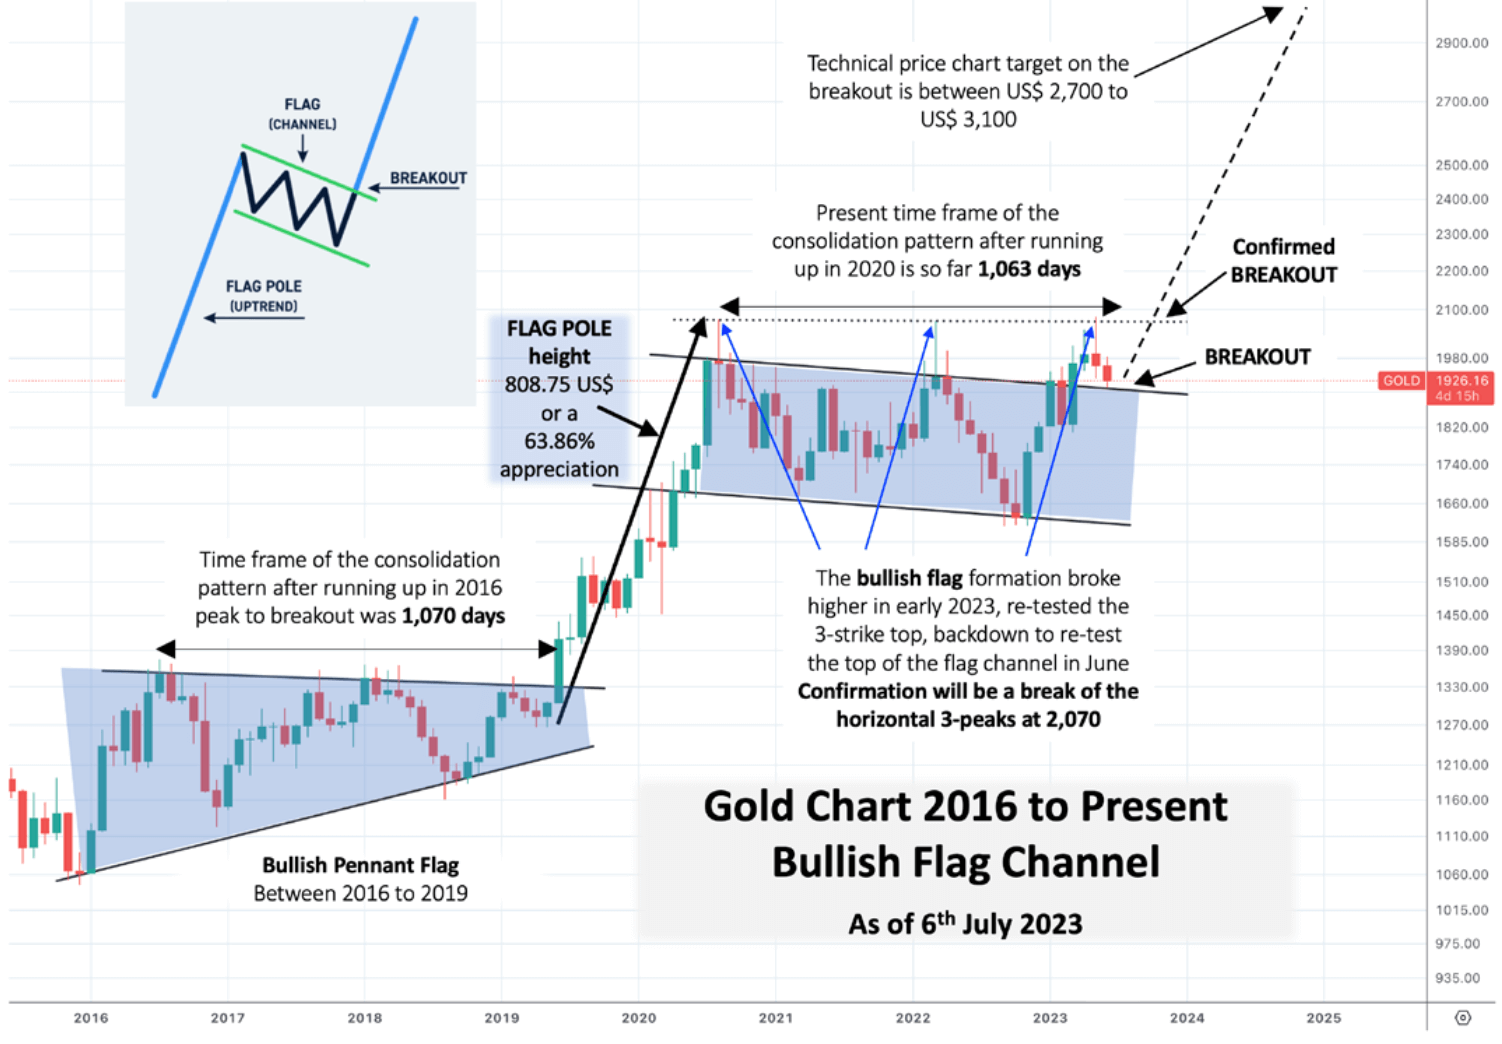 Gold chart 2016 to present bullish flag channel as of 6th July 2023